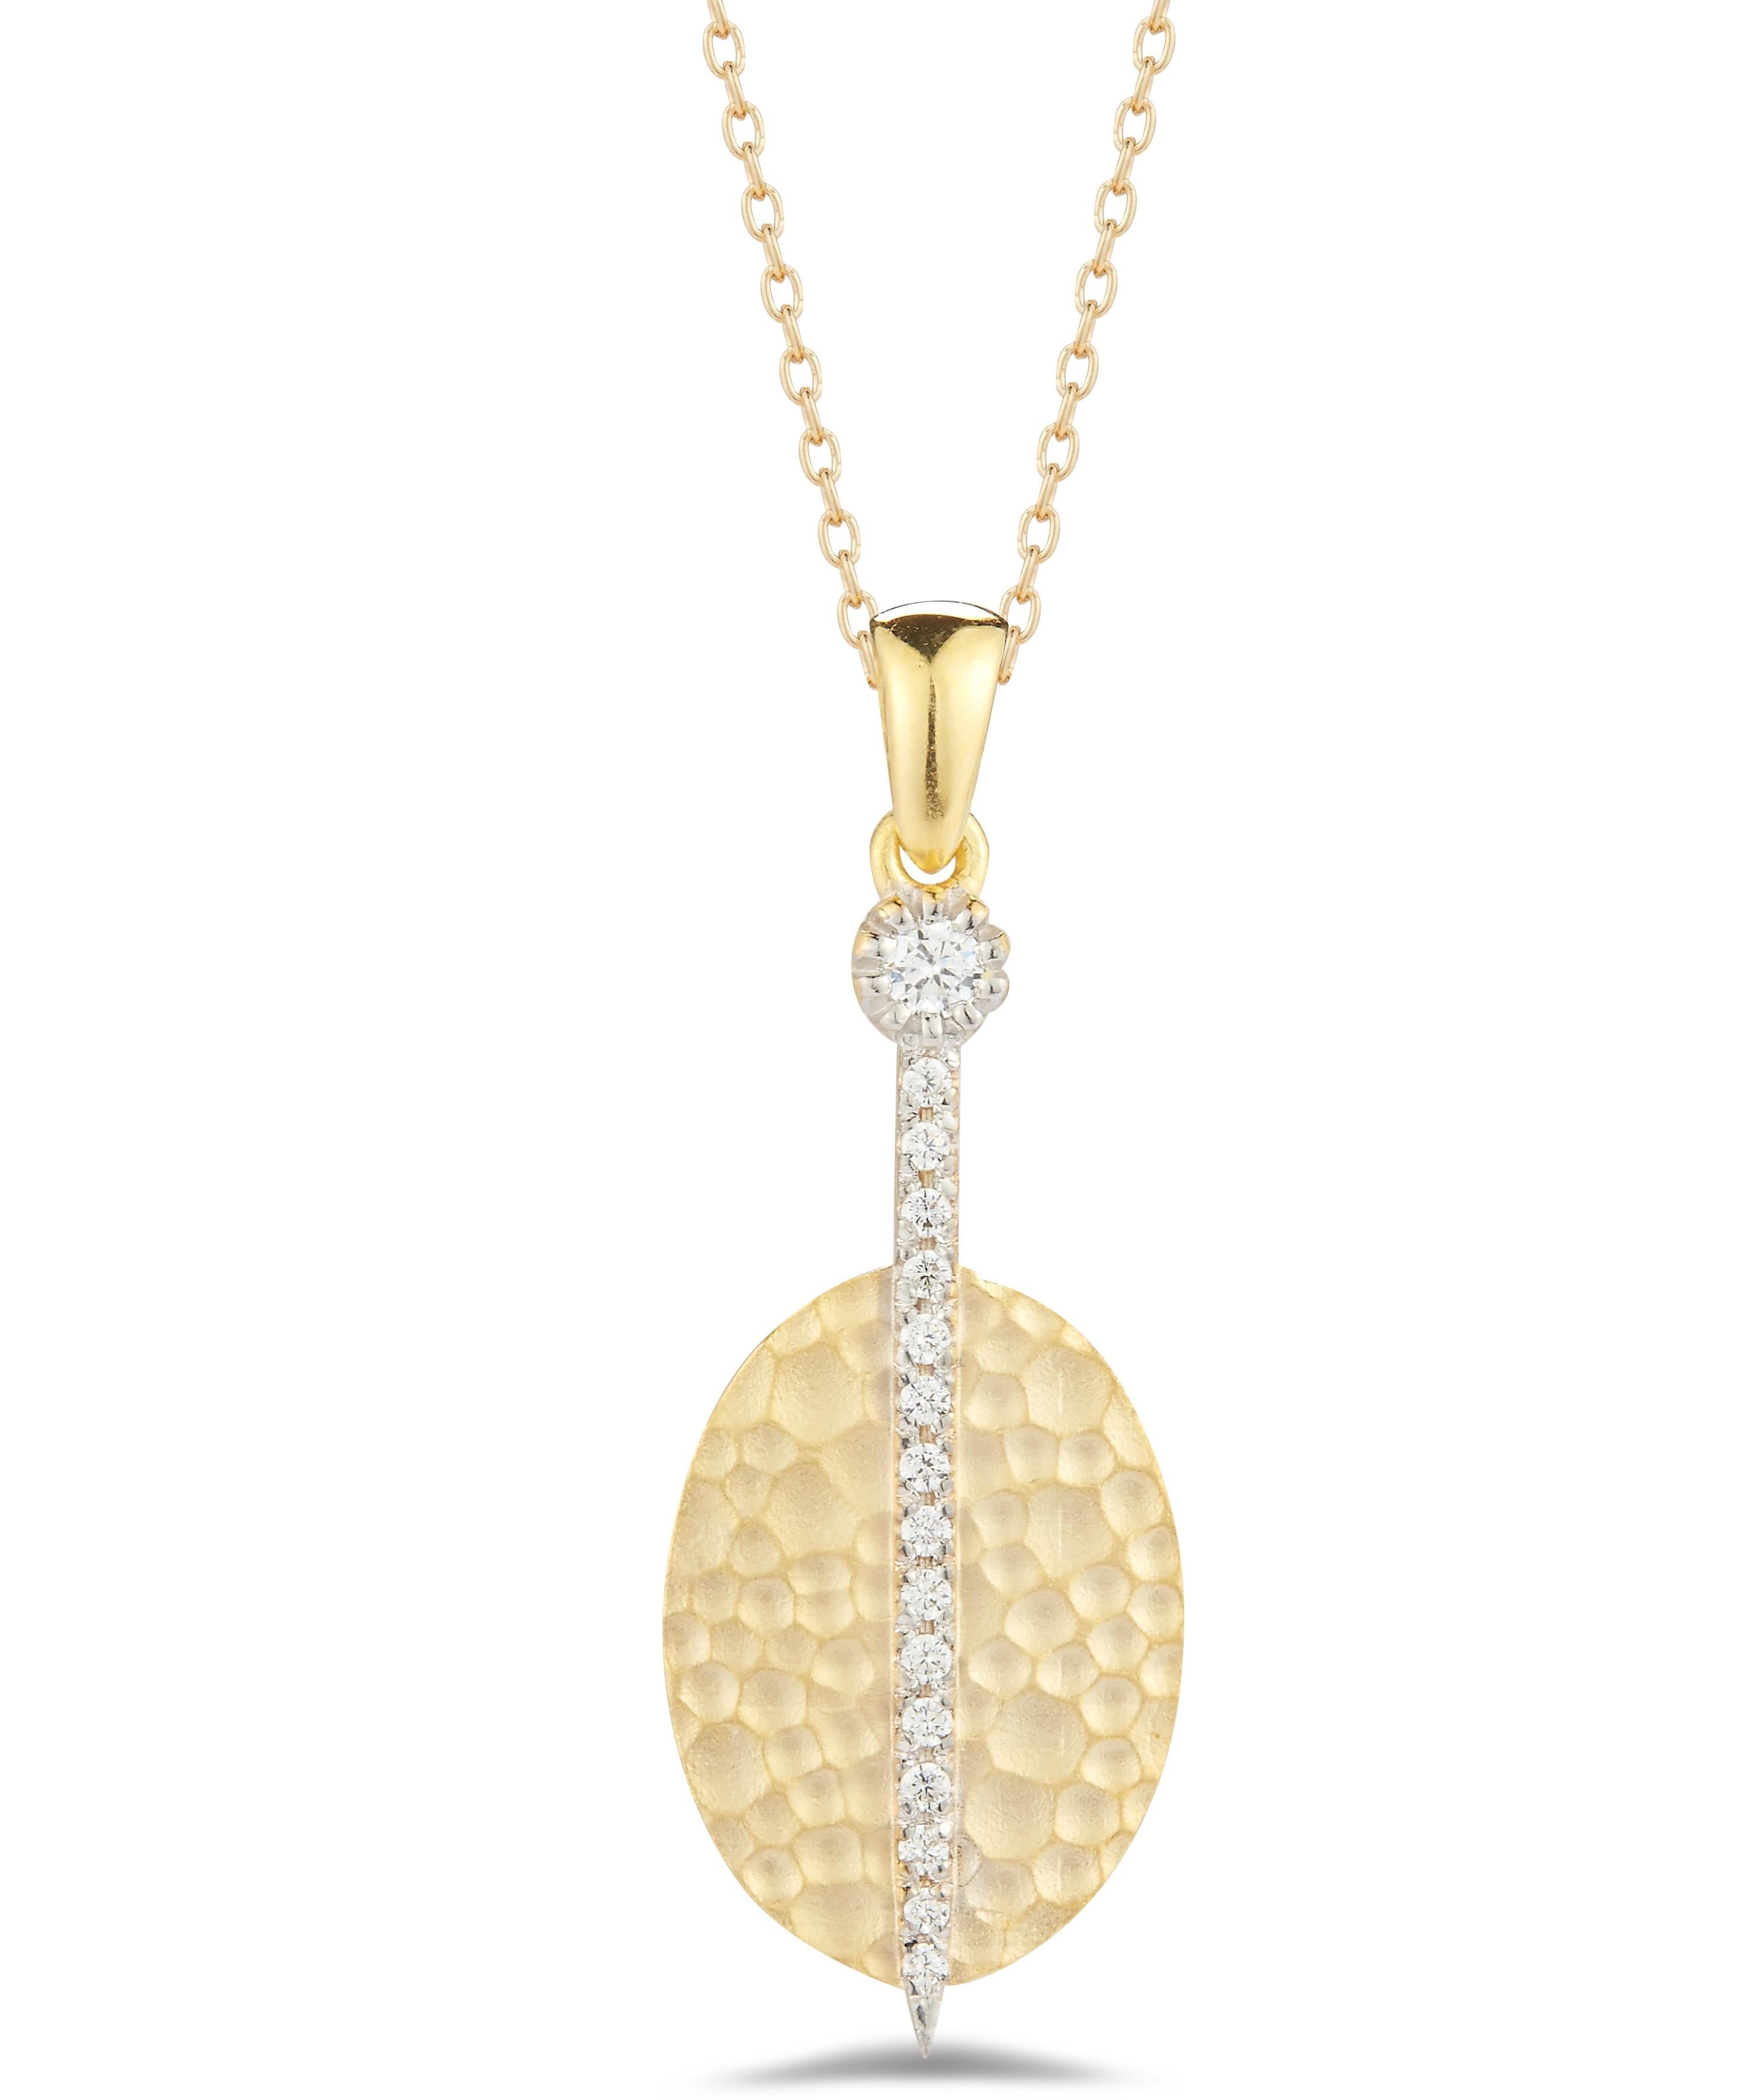 14 Karat Yellow Gold Hand-Crafted Matte and Hammer-Finished Oval-Shaped Pendant, Accented with 0.13 Carat of Pave Set Diamonds, Sliding on a 16